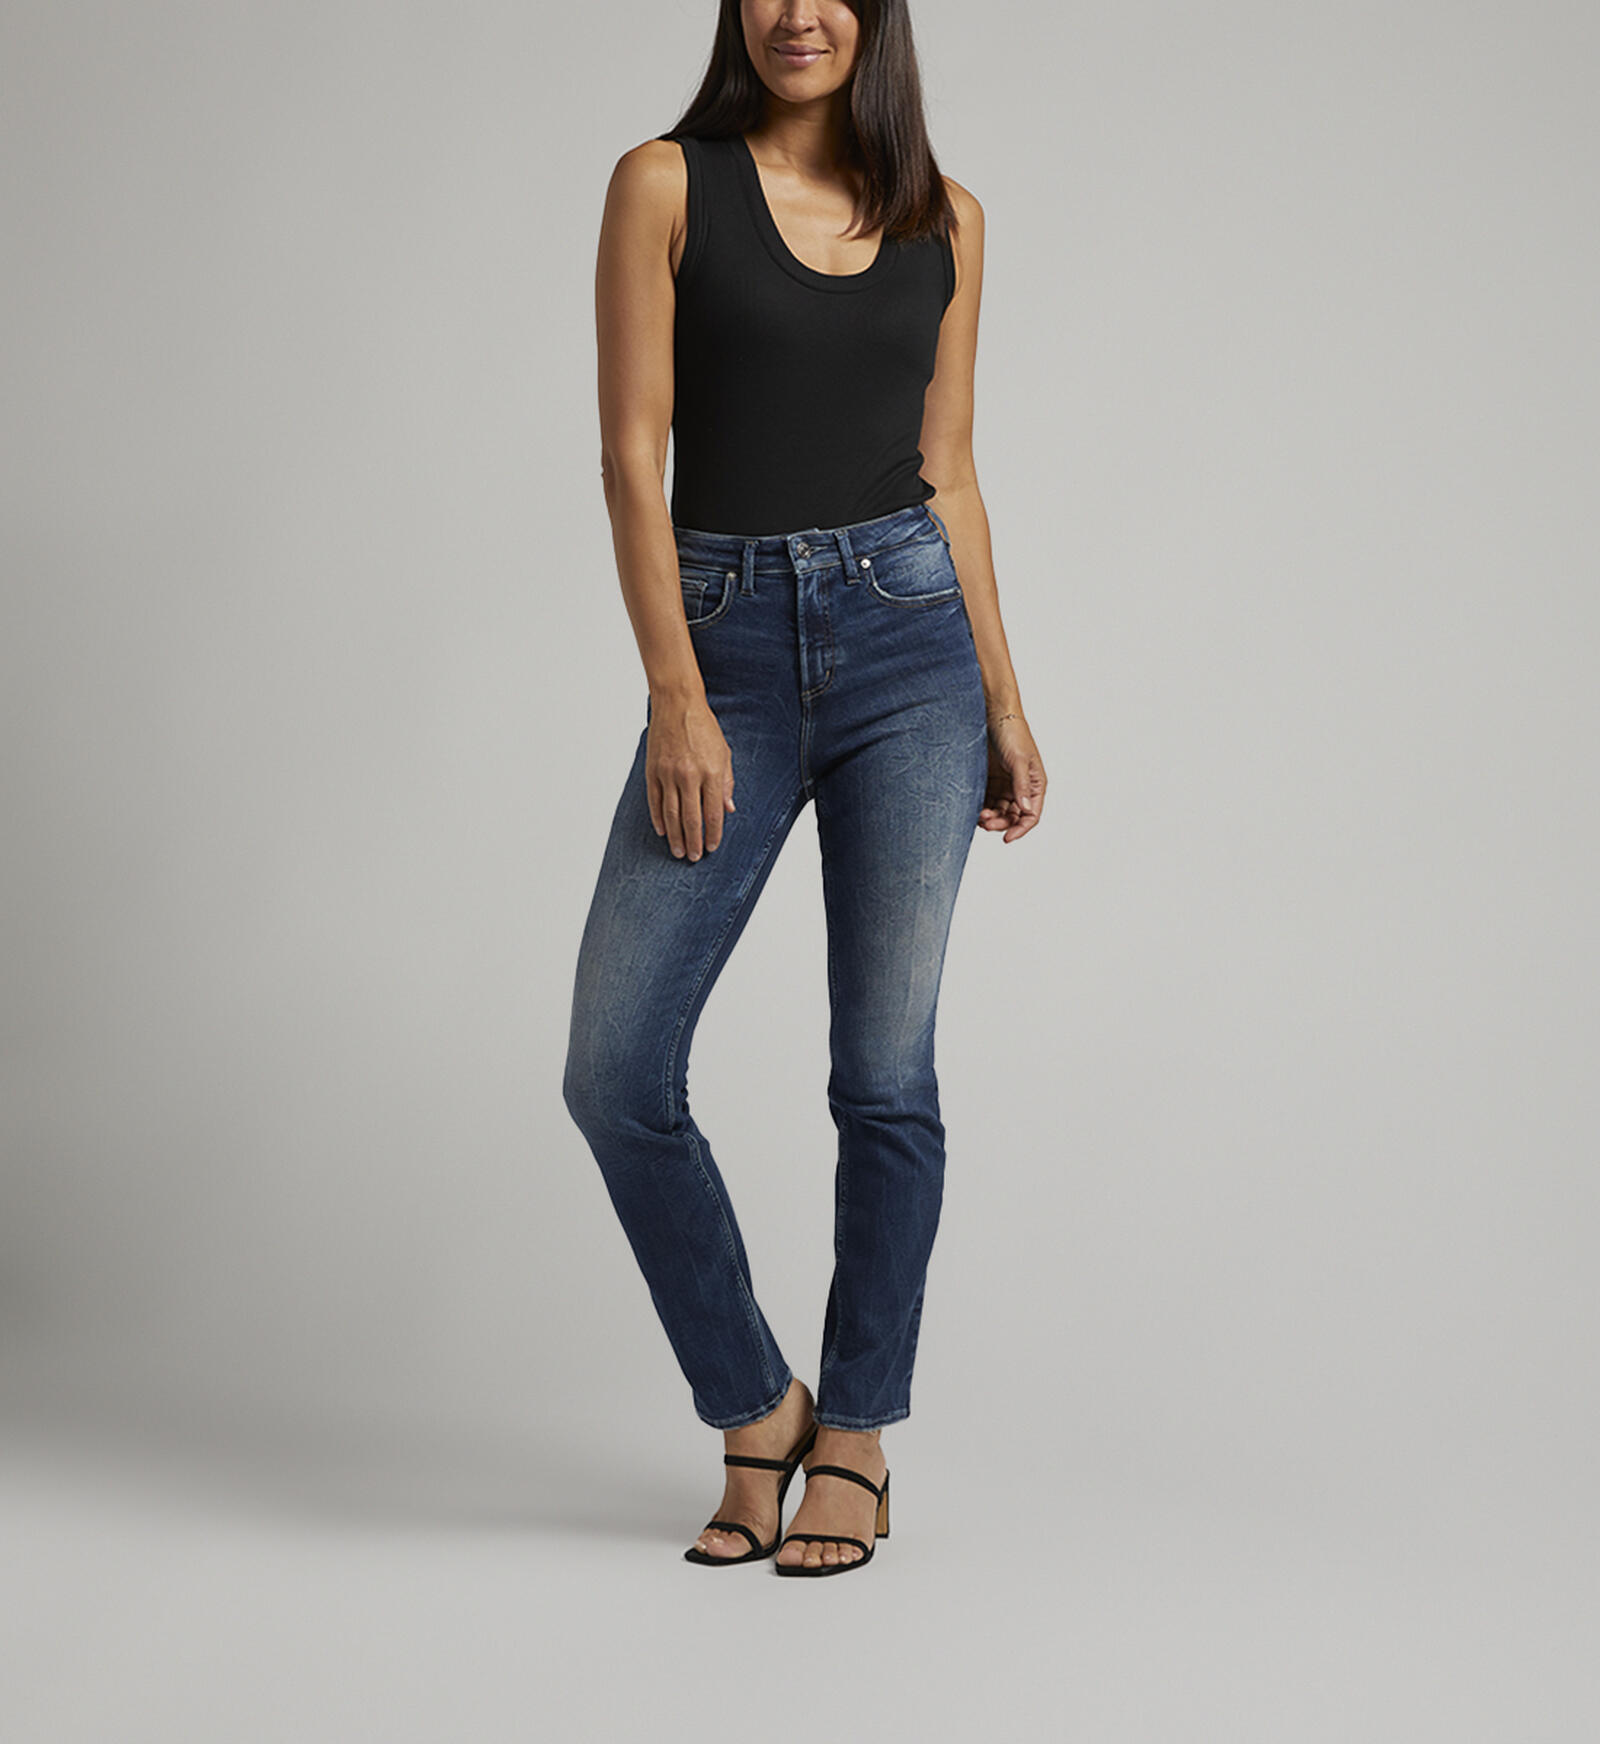 Buy Infinite Fit High Rise Straight Leg Jeans for USD 68.00